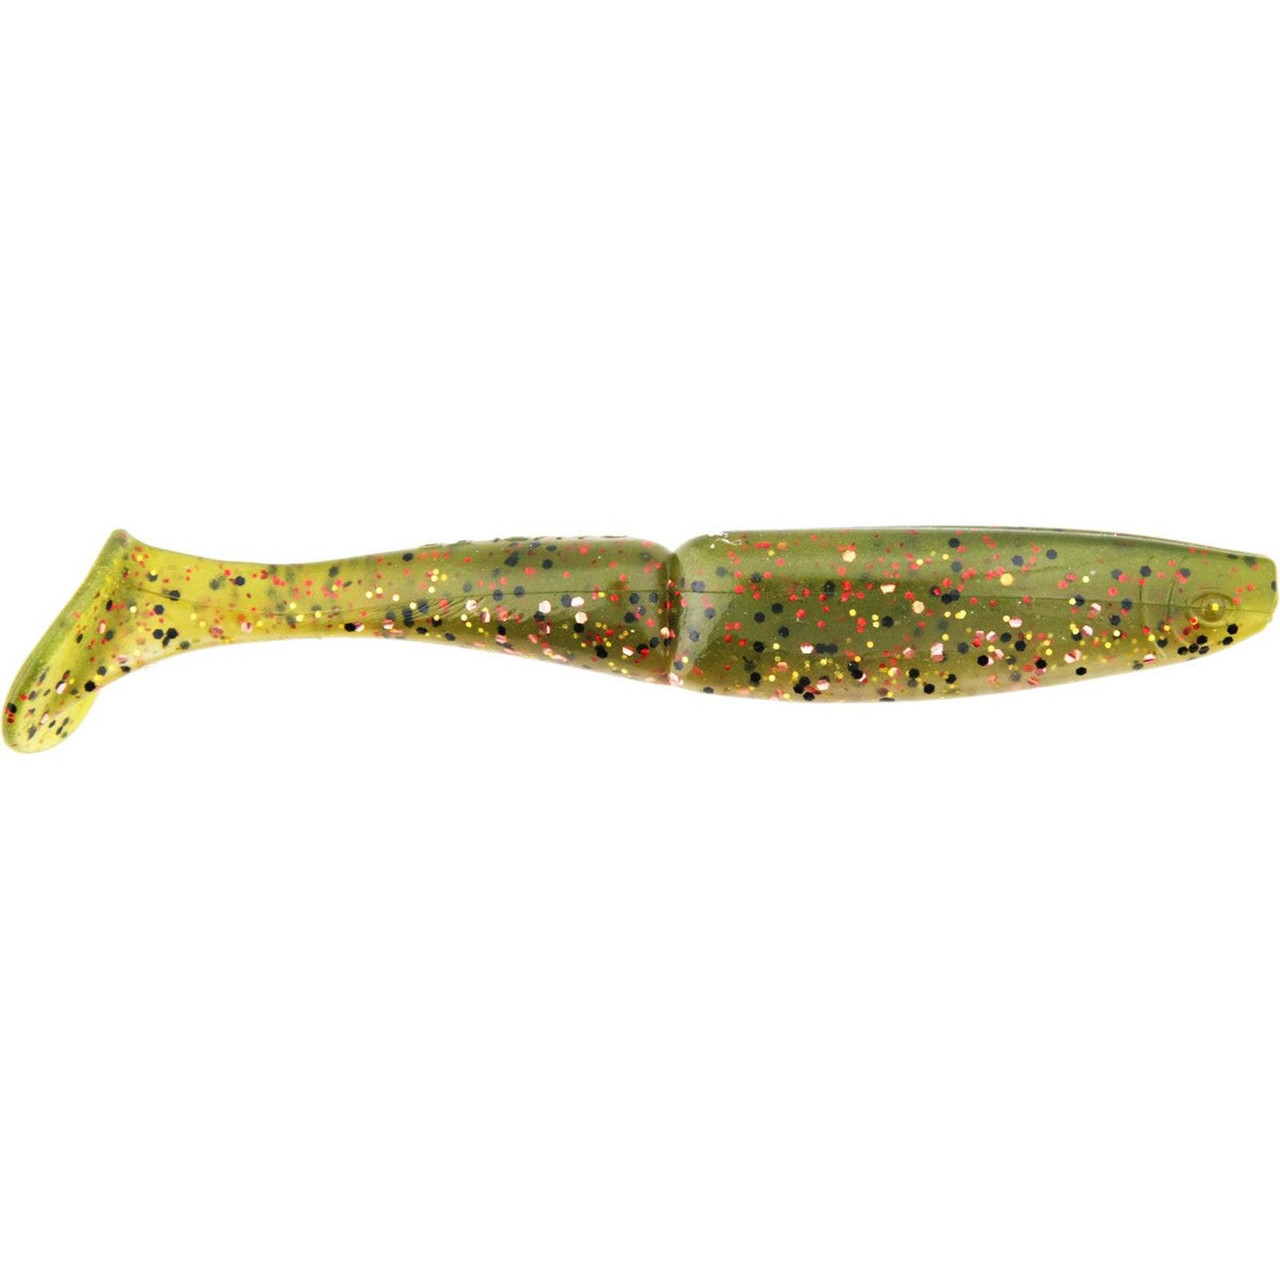 Gambler EZ Swimmer Swimbaits - Fin Feather Fur Outfitters